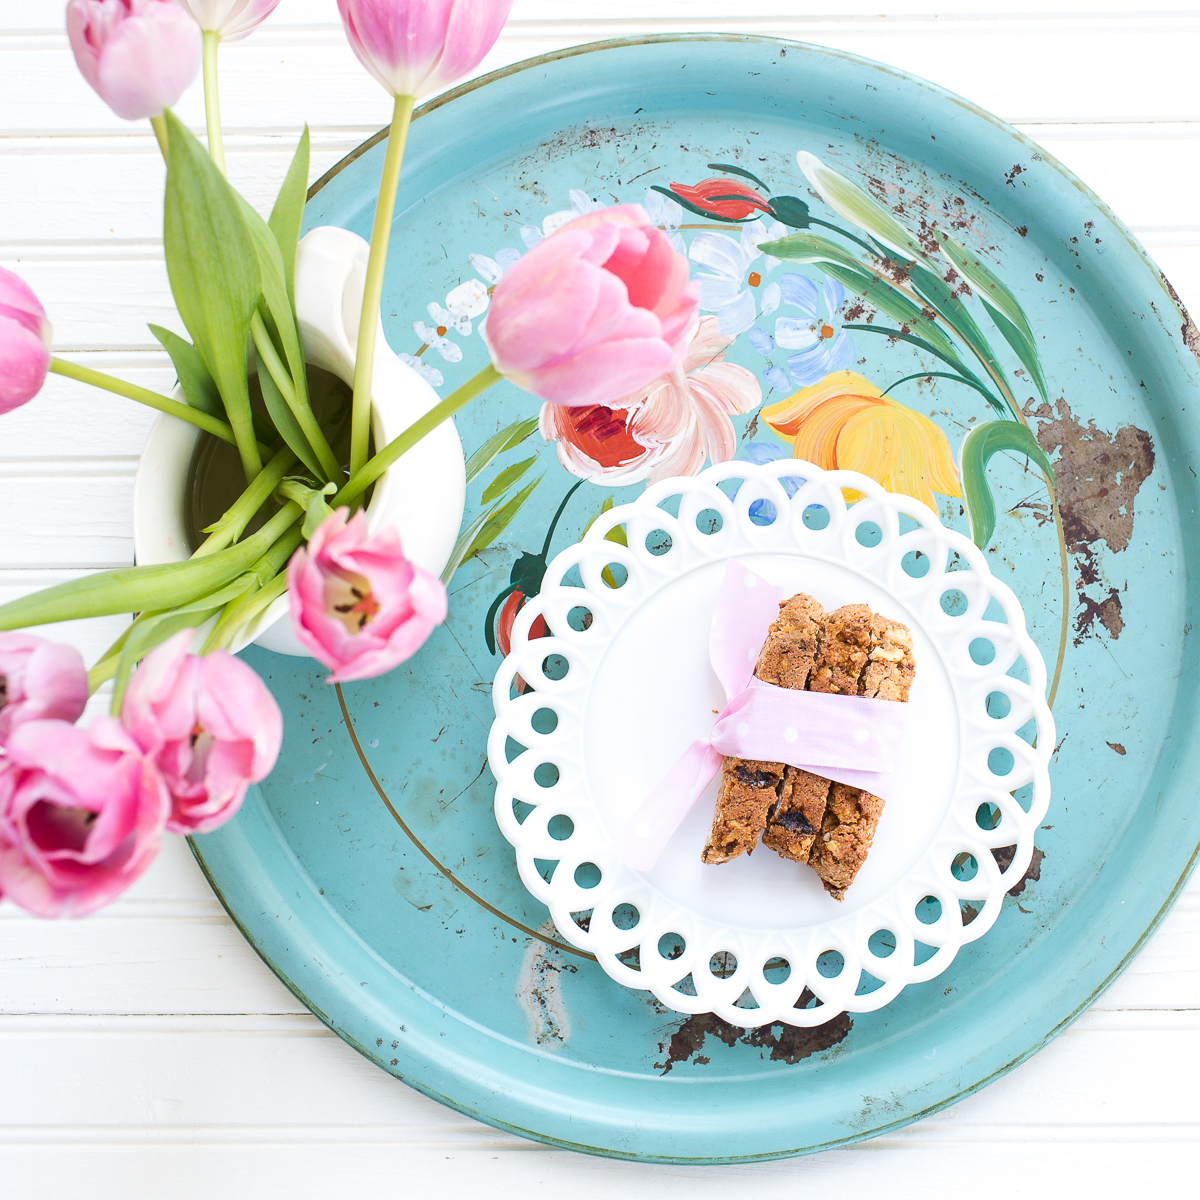 Blue tray with a plate of biscotti and vase of tulips.